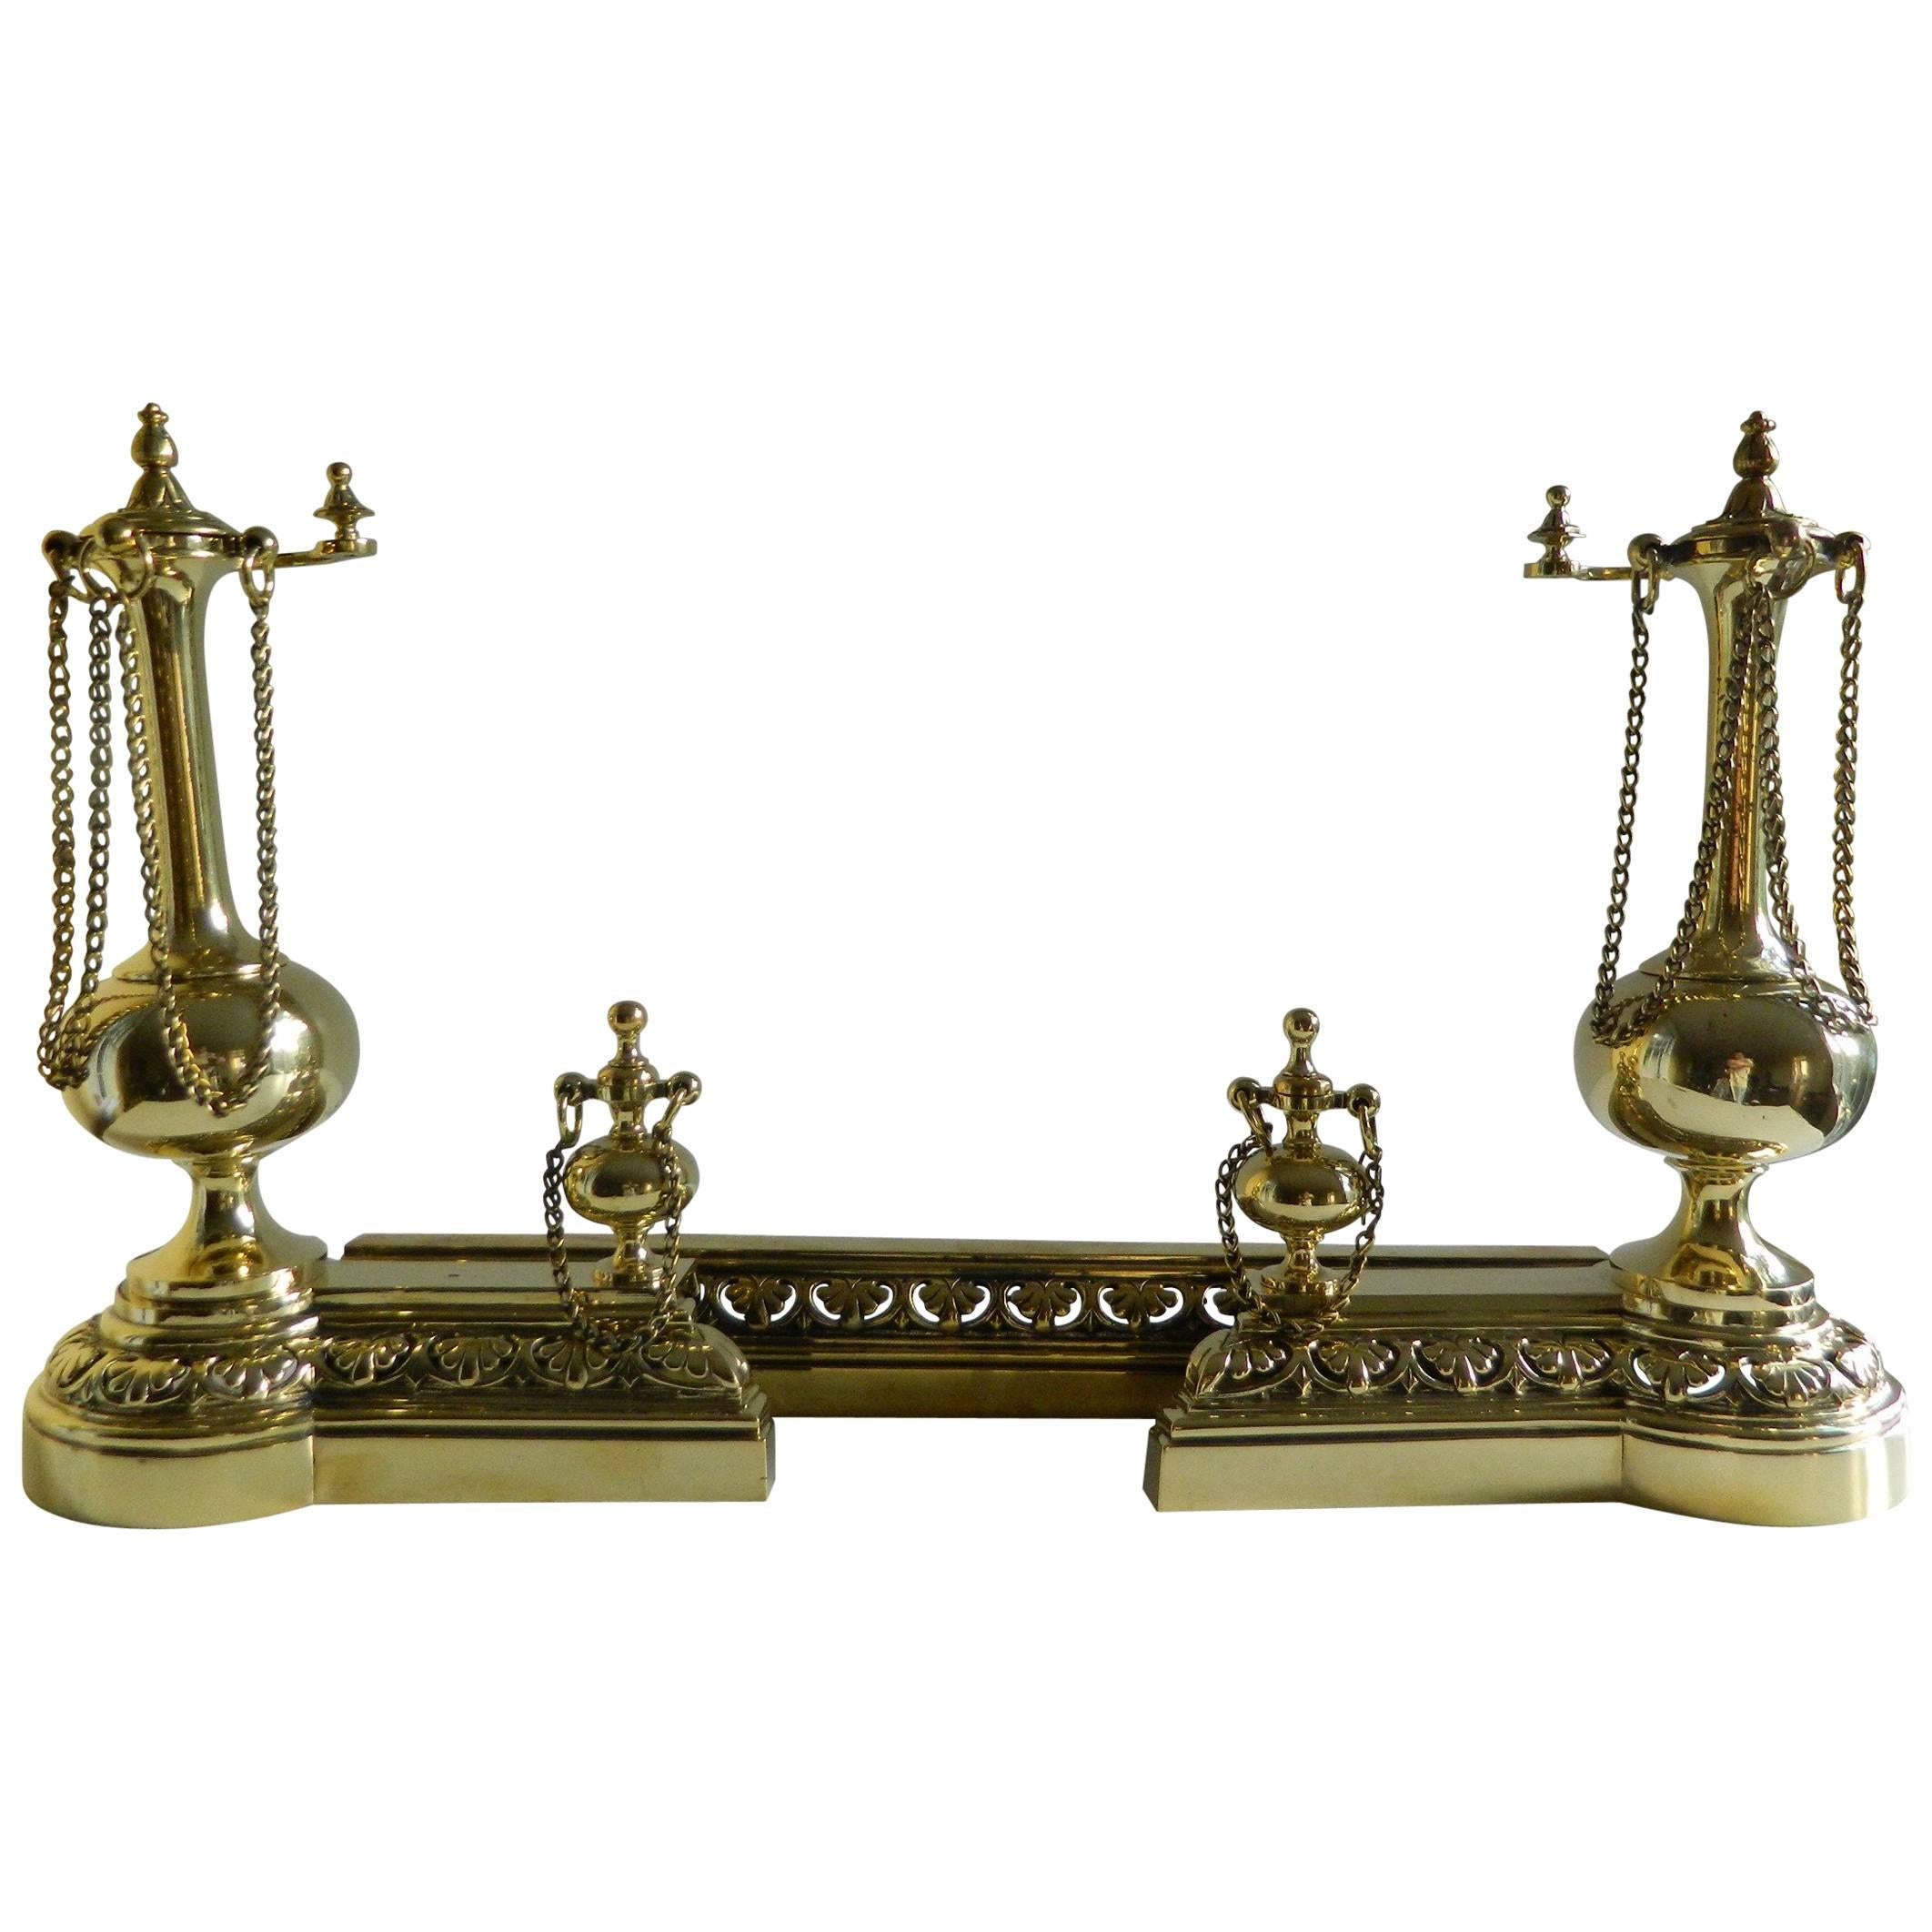 Pair of Polished Brass Chenets or Andirons with Fender, 19th Century For Sale